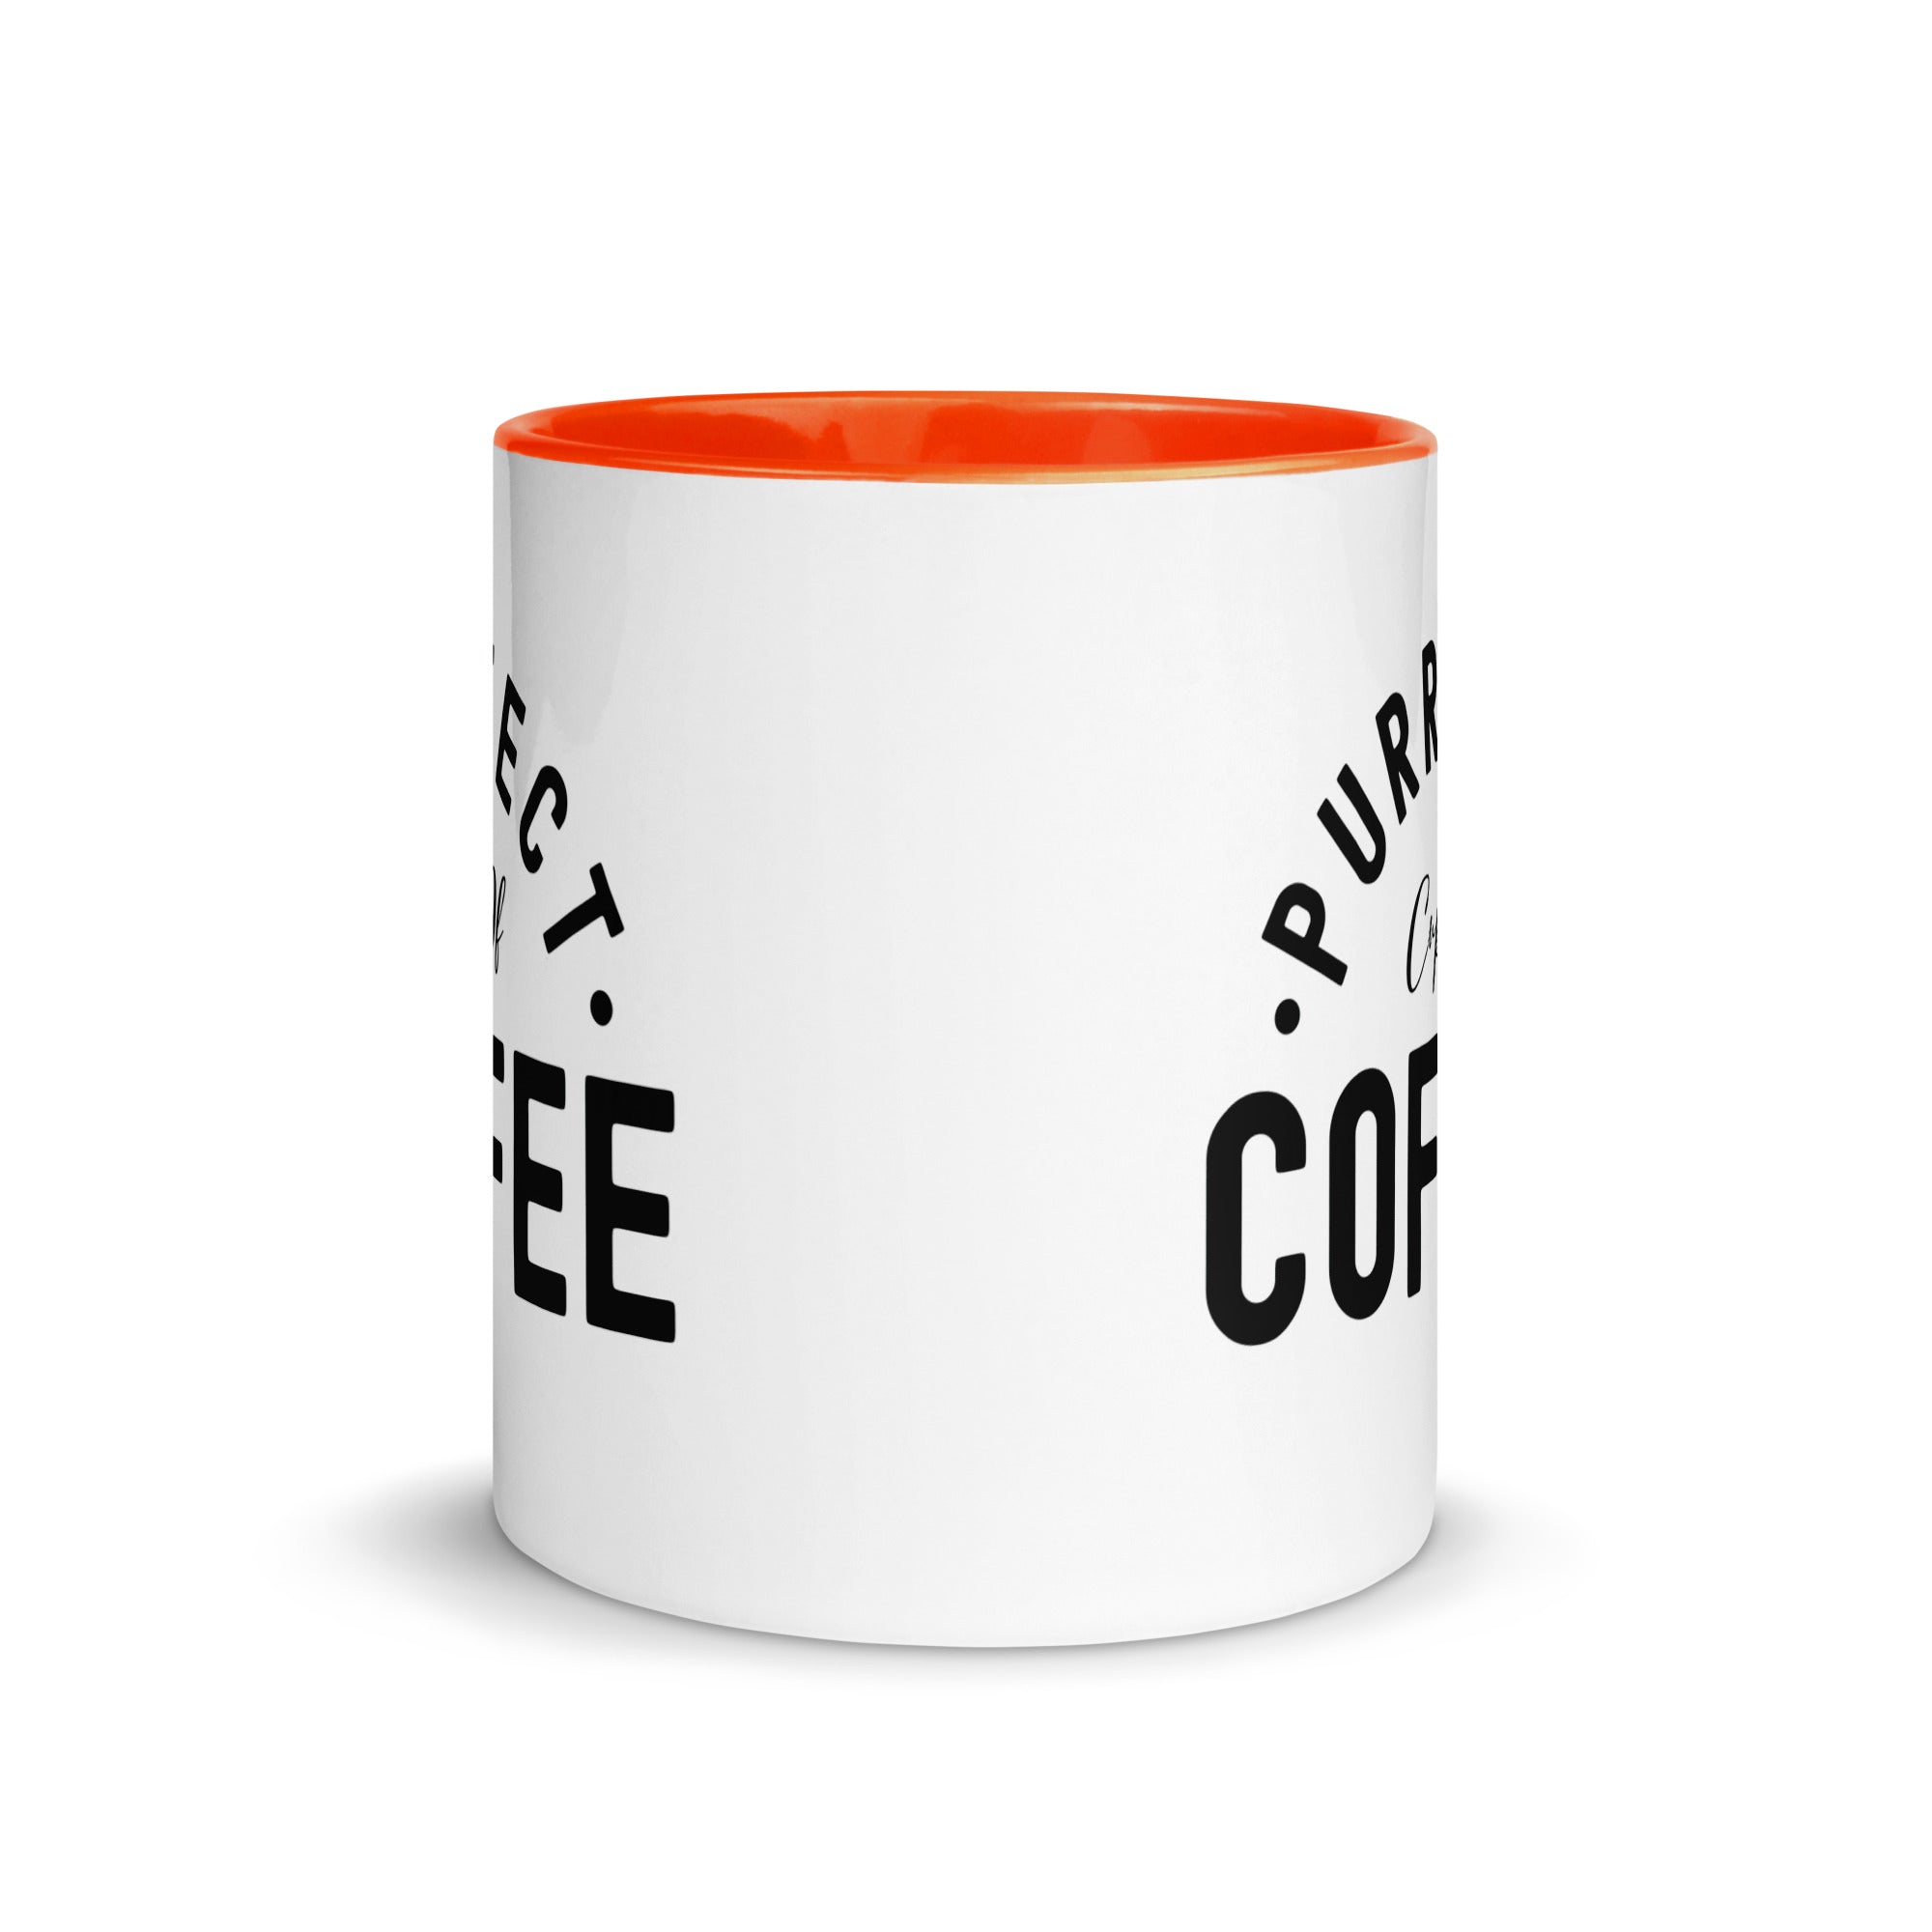 Mug with Color Inside | Purrfect cup of coffee